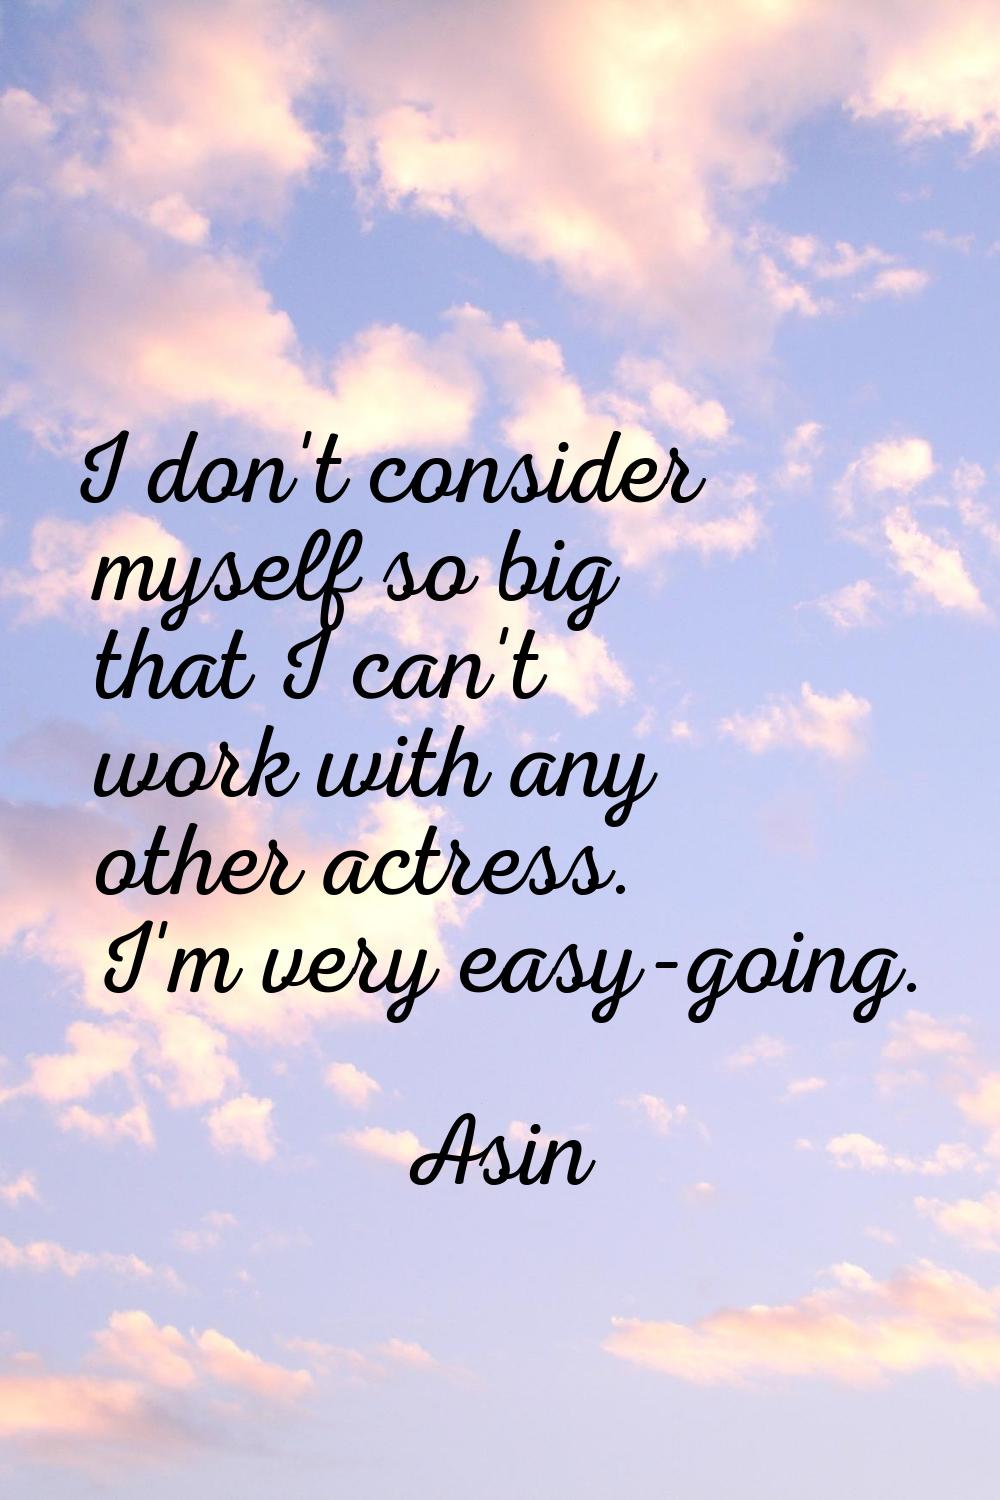 I don't consider myself so big that I can't work with any other actress. I'm very easy-going.